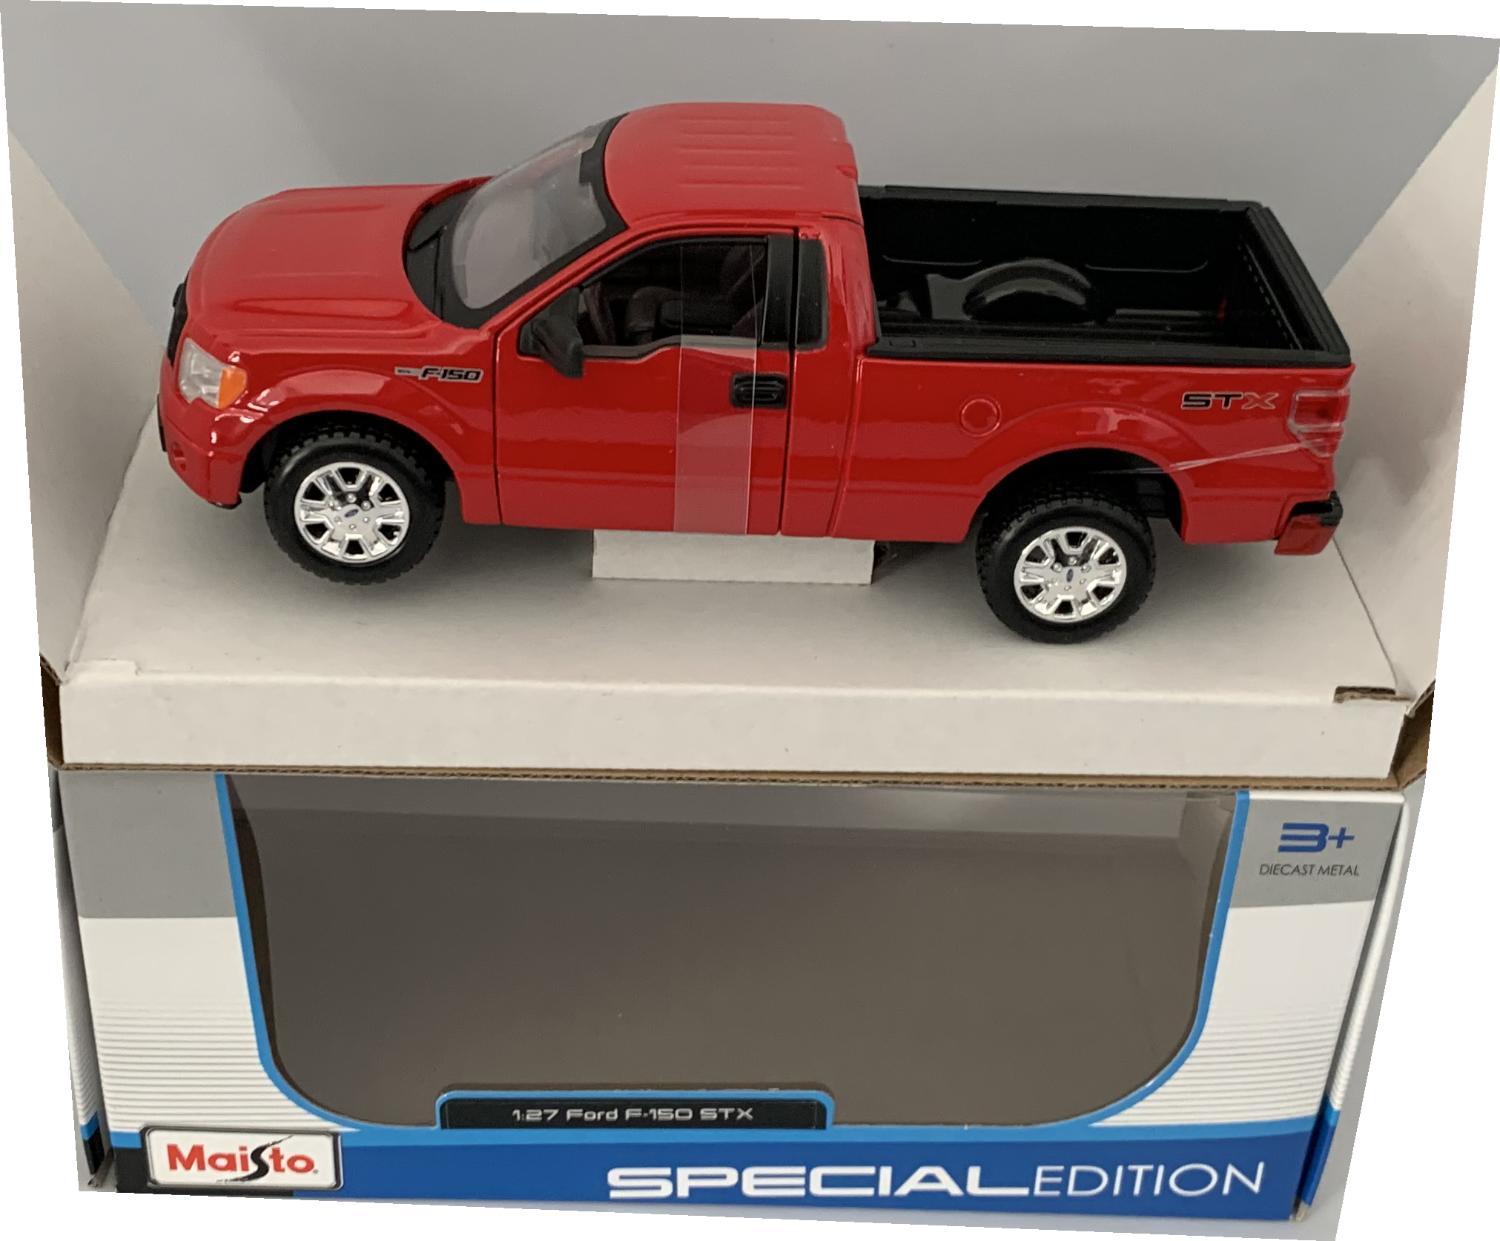 An excellent scale model of the Ford F-150 STX with high level of detail throughout, all authentically recreated. The model is presented in a window display box, the car is approx. 20 cm long and the presentation box is 23 cm long